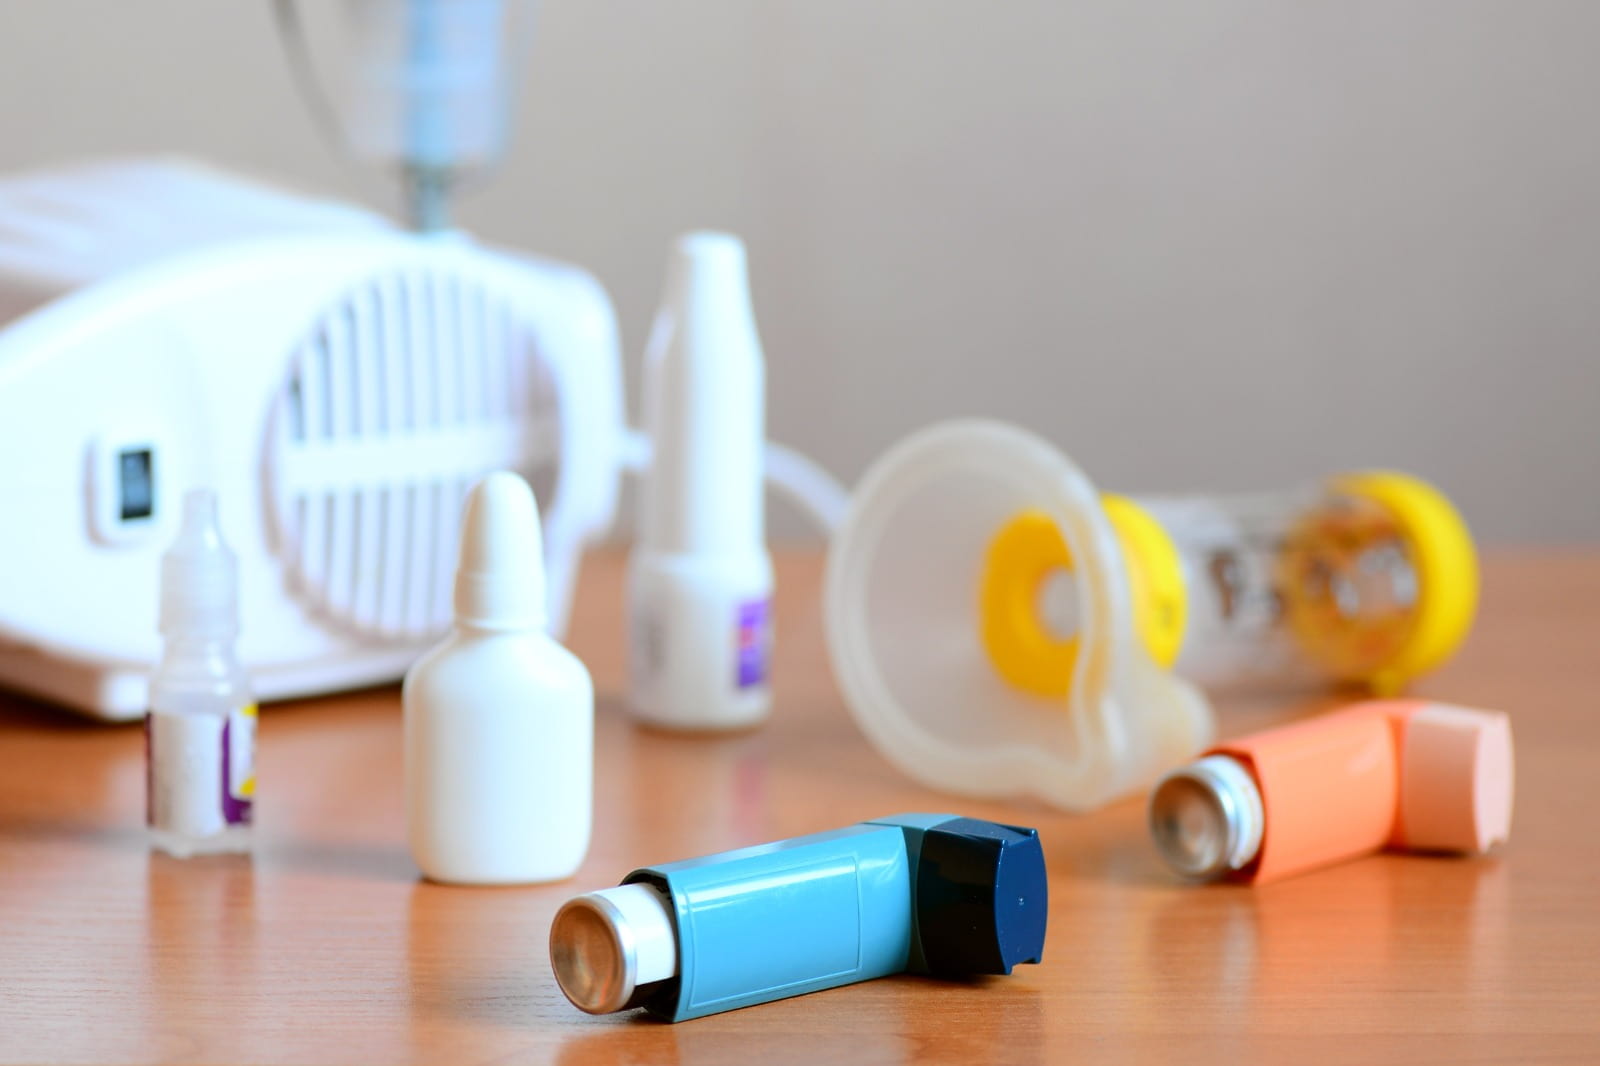 Know when to use nebulizers or inhalers for better asthma management